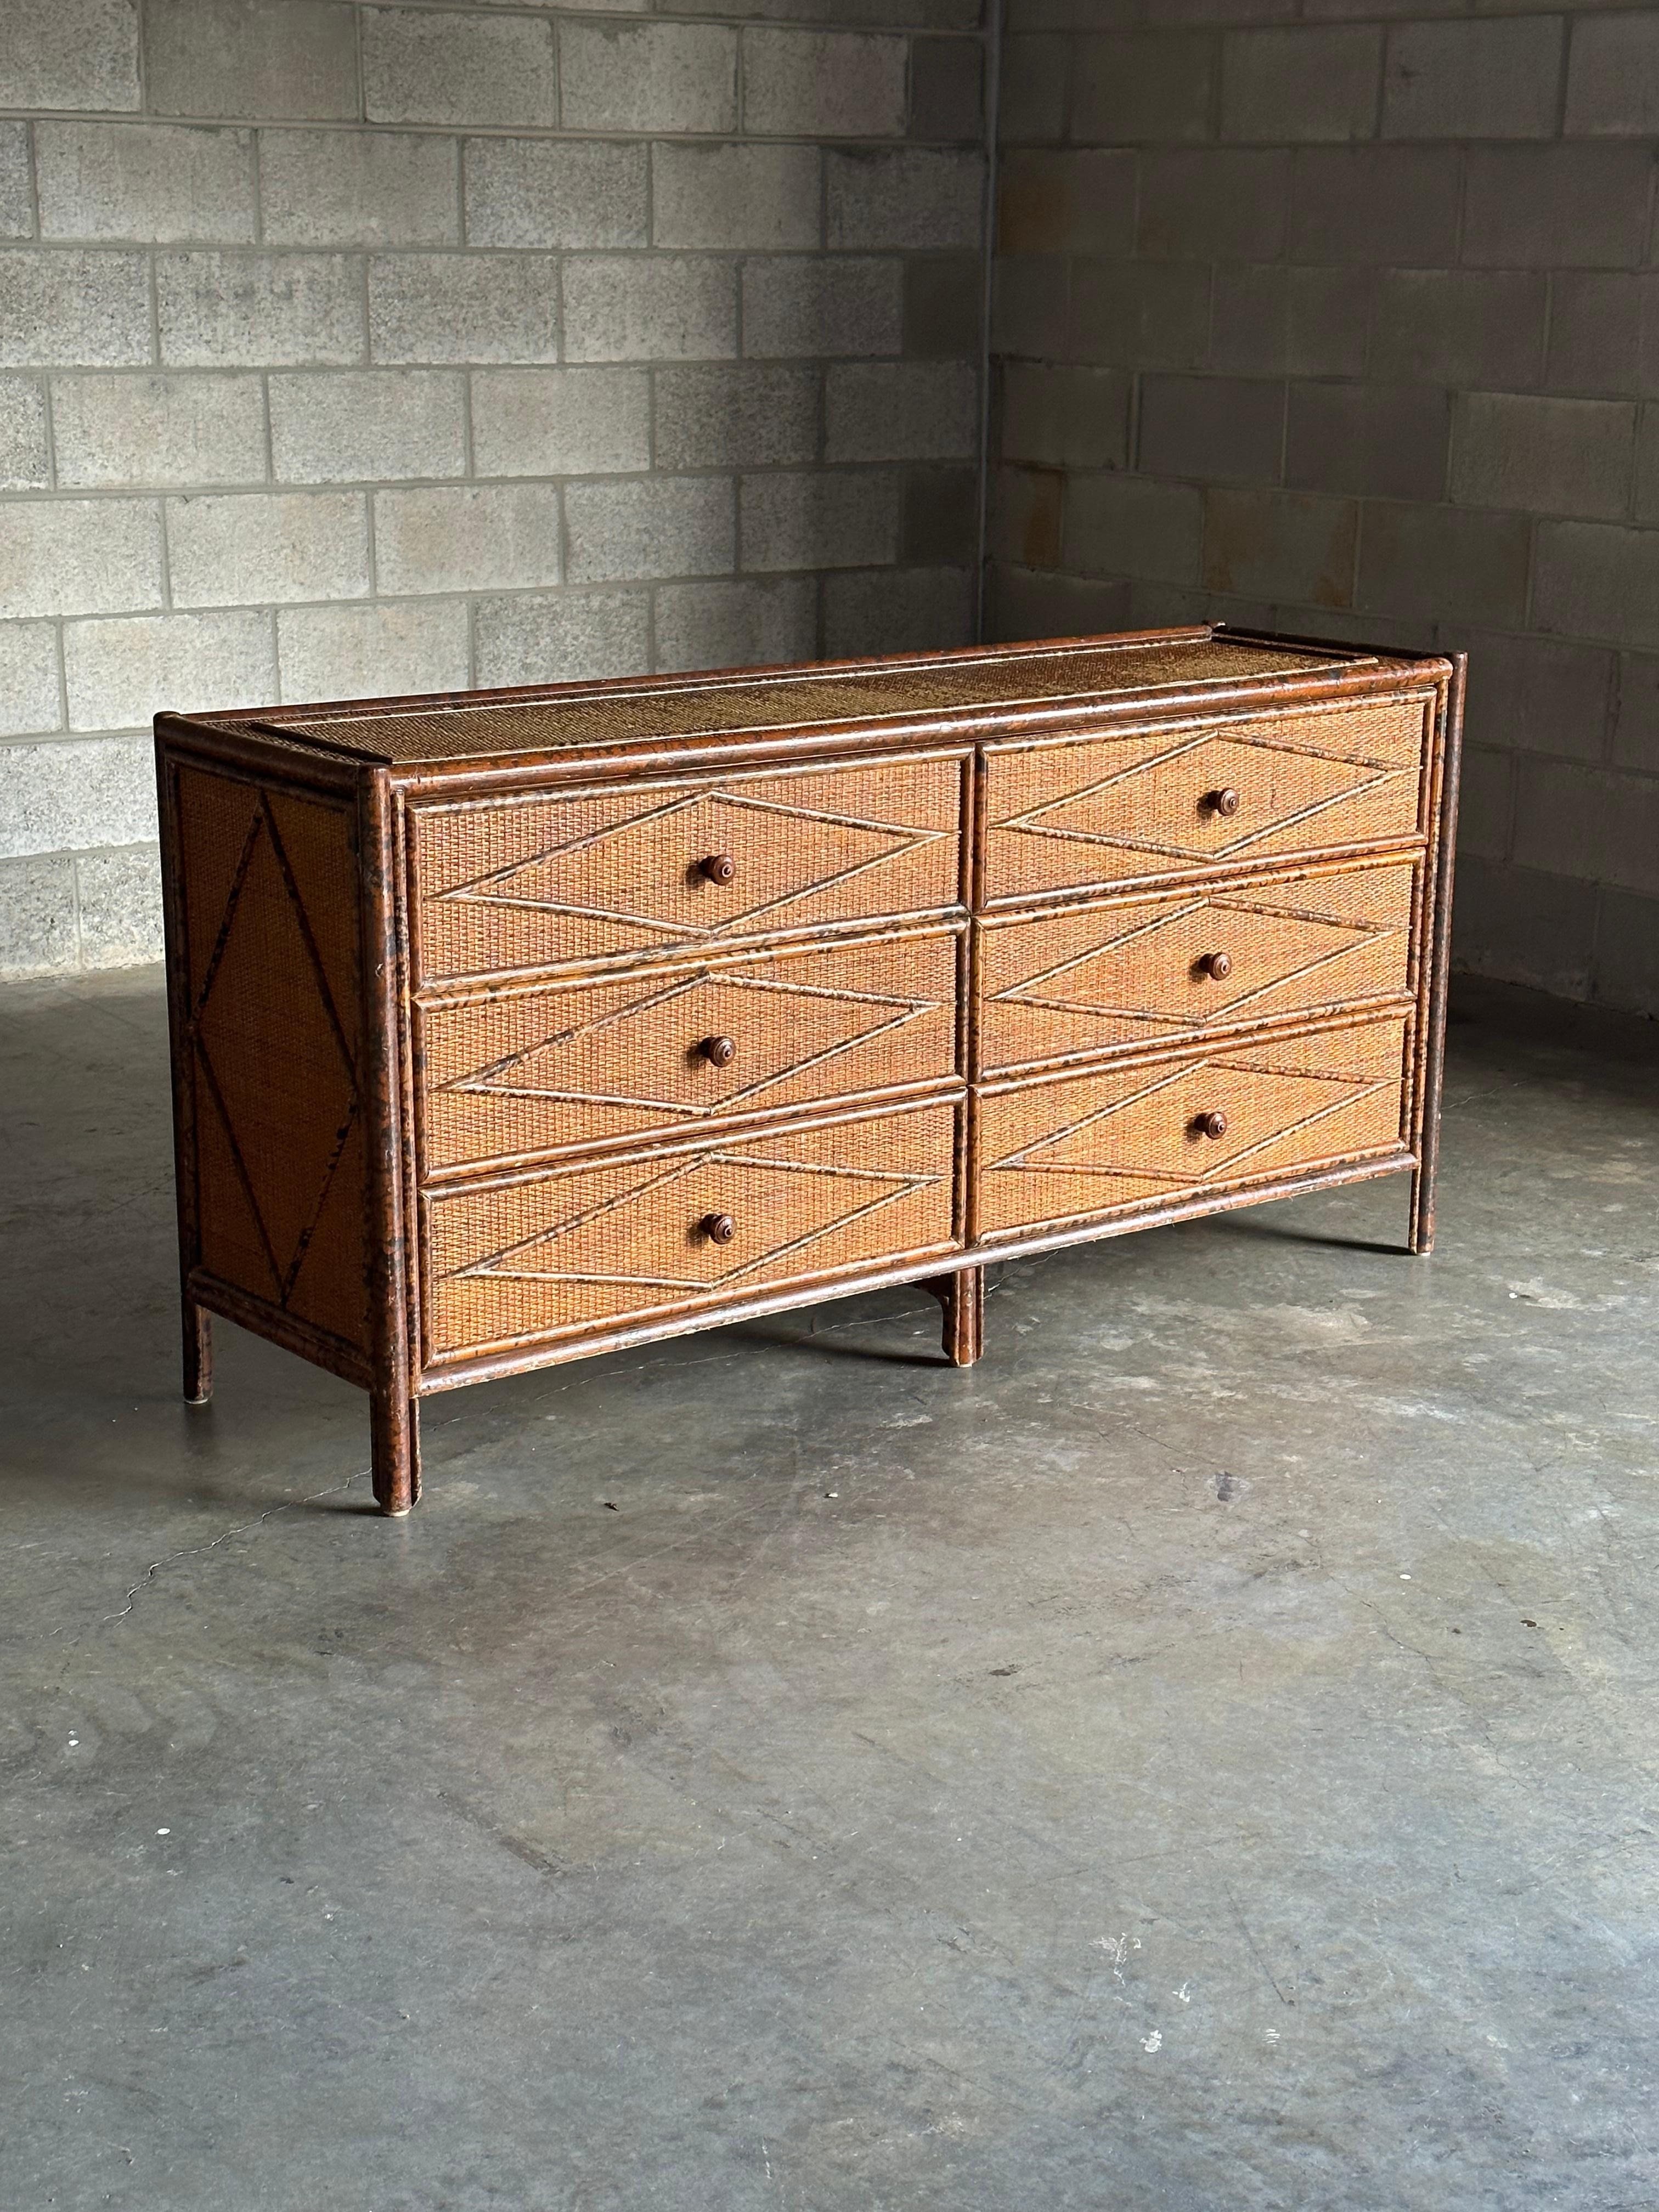 Vintage British colonial style dresser inbamboo and rattan. Six spacious drawers clad in rattan with a bamboo skeleton. Wonderful diamond pattern throughout. Would work in a variety of interiors. Design is attributed to Ralph Lauren, would also work